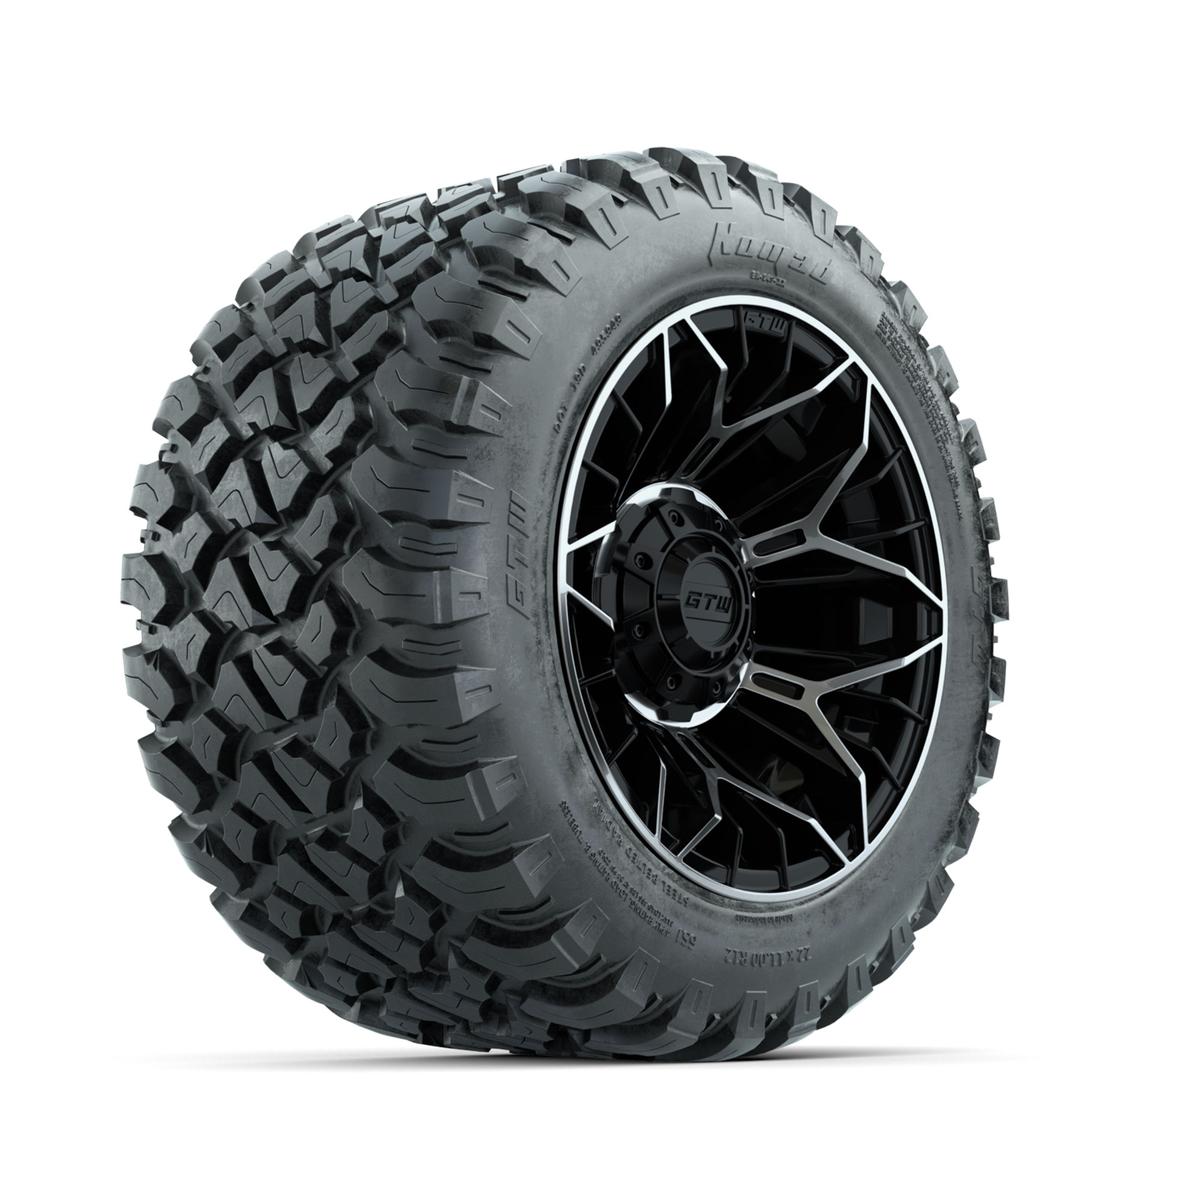 Set of (4) 12 in GTW® Stellar Machined & Black Wheels with 22x11-R12 Nomad All-Terrain Tires